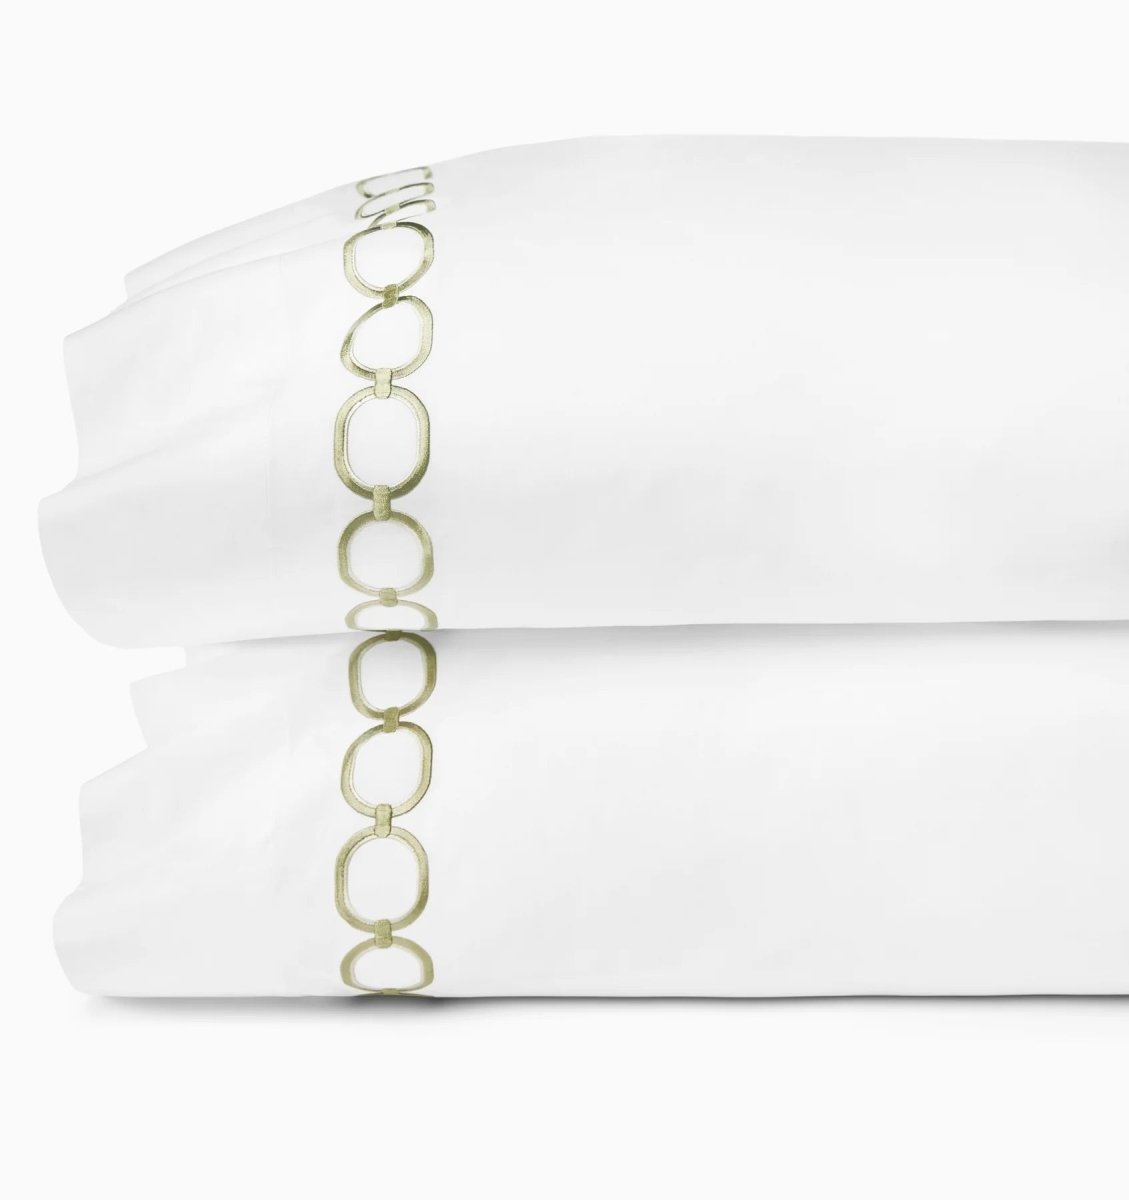 Flat Sheet - Sferra Linens Catena Willow Green Percale Bedding at Fig Linens and Home